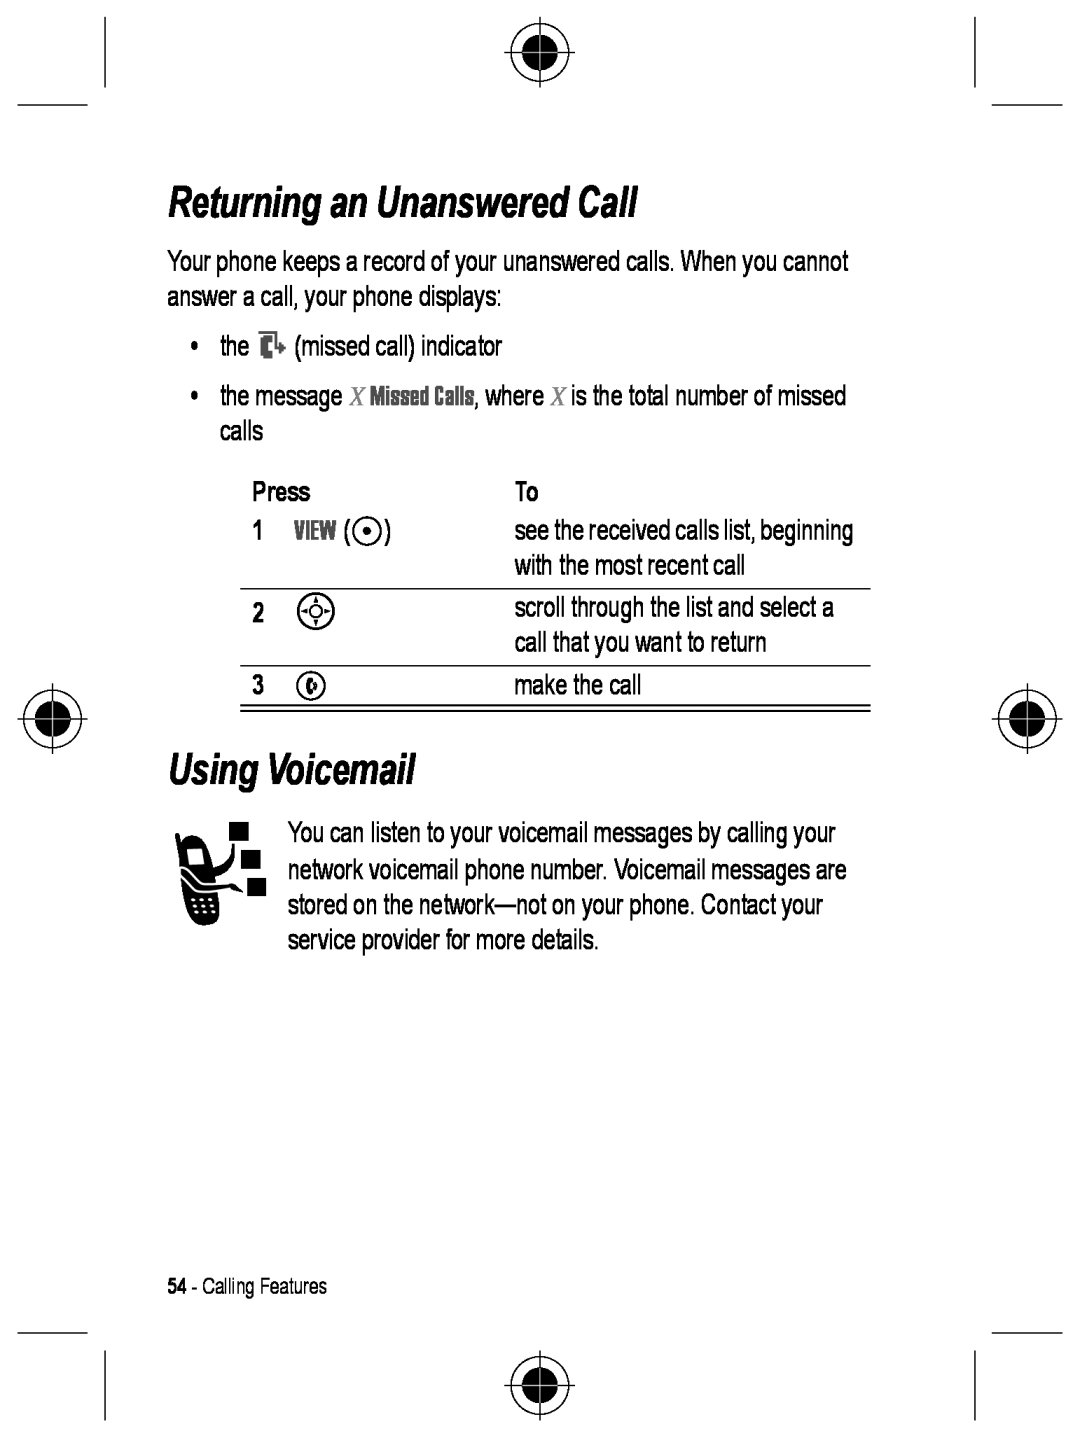 Motorola C330 manual Returning an Unanswered Call, Using Voicemail, View + 